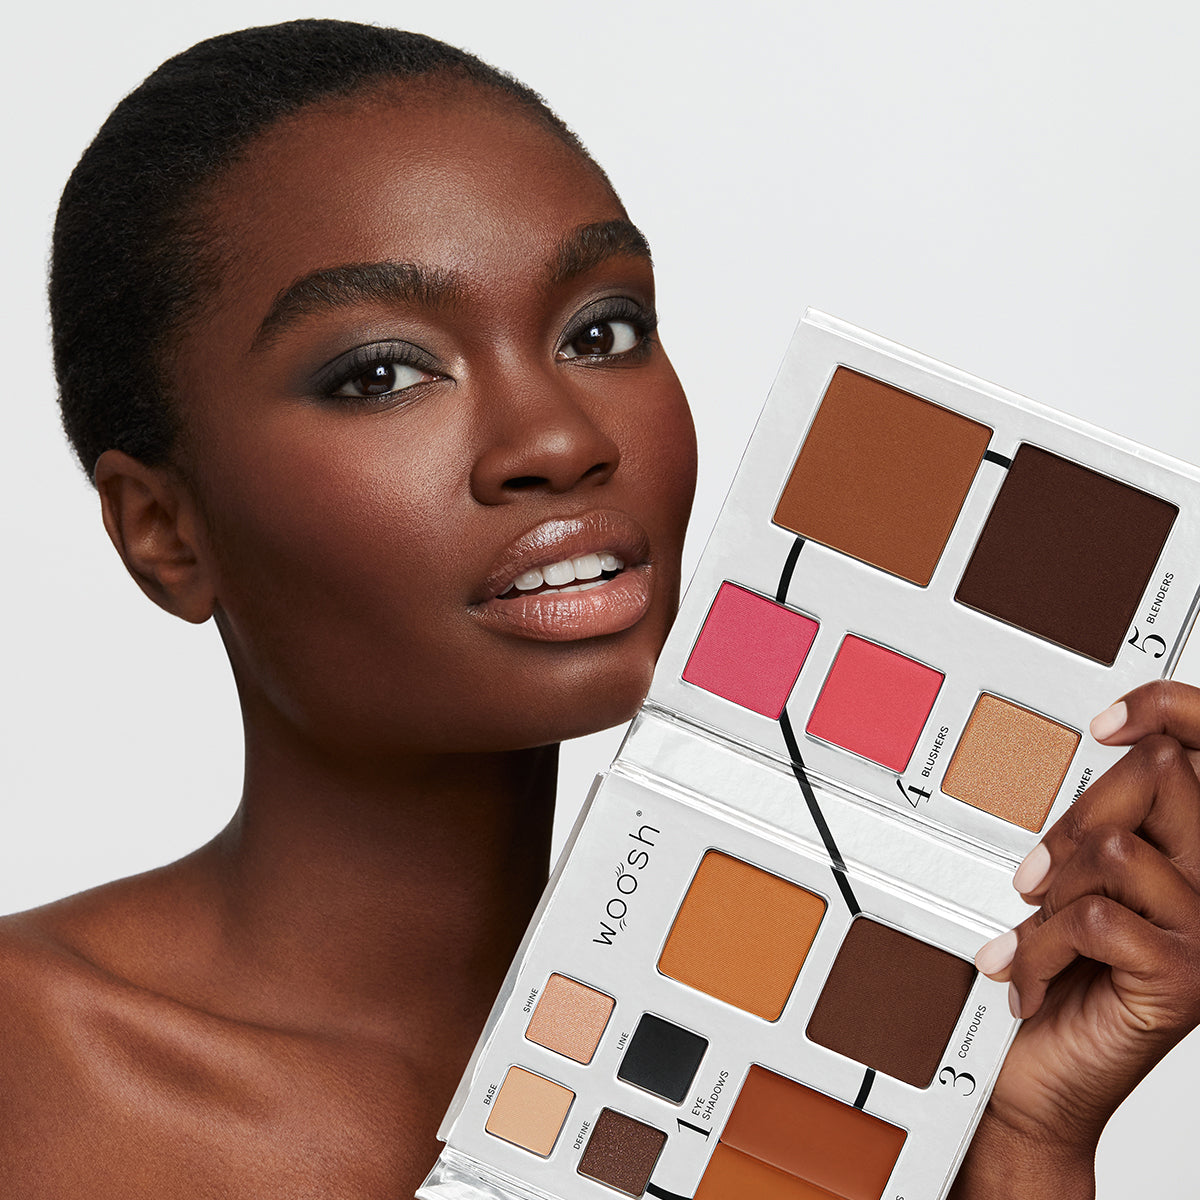 a photo of a very dark skinned African model wearing beautiful, natural-looking makeup holding the Fold Out Face palette in shade #5 deep